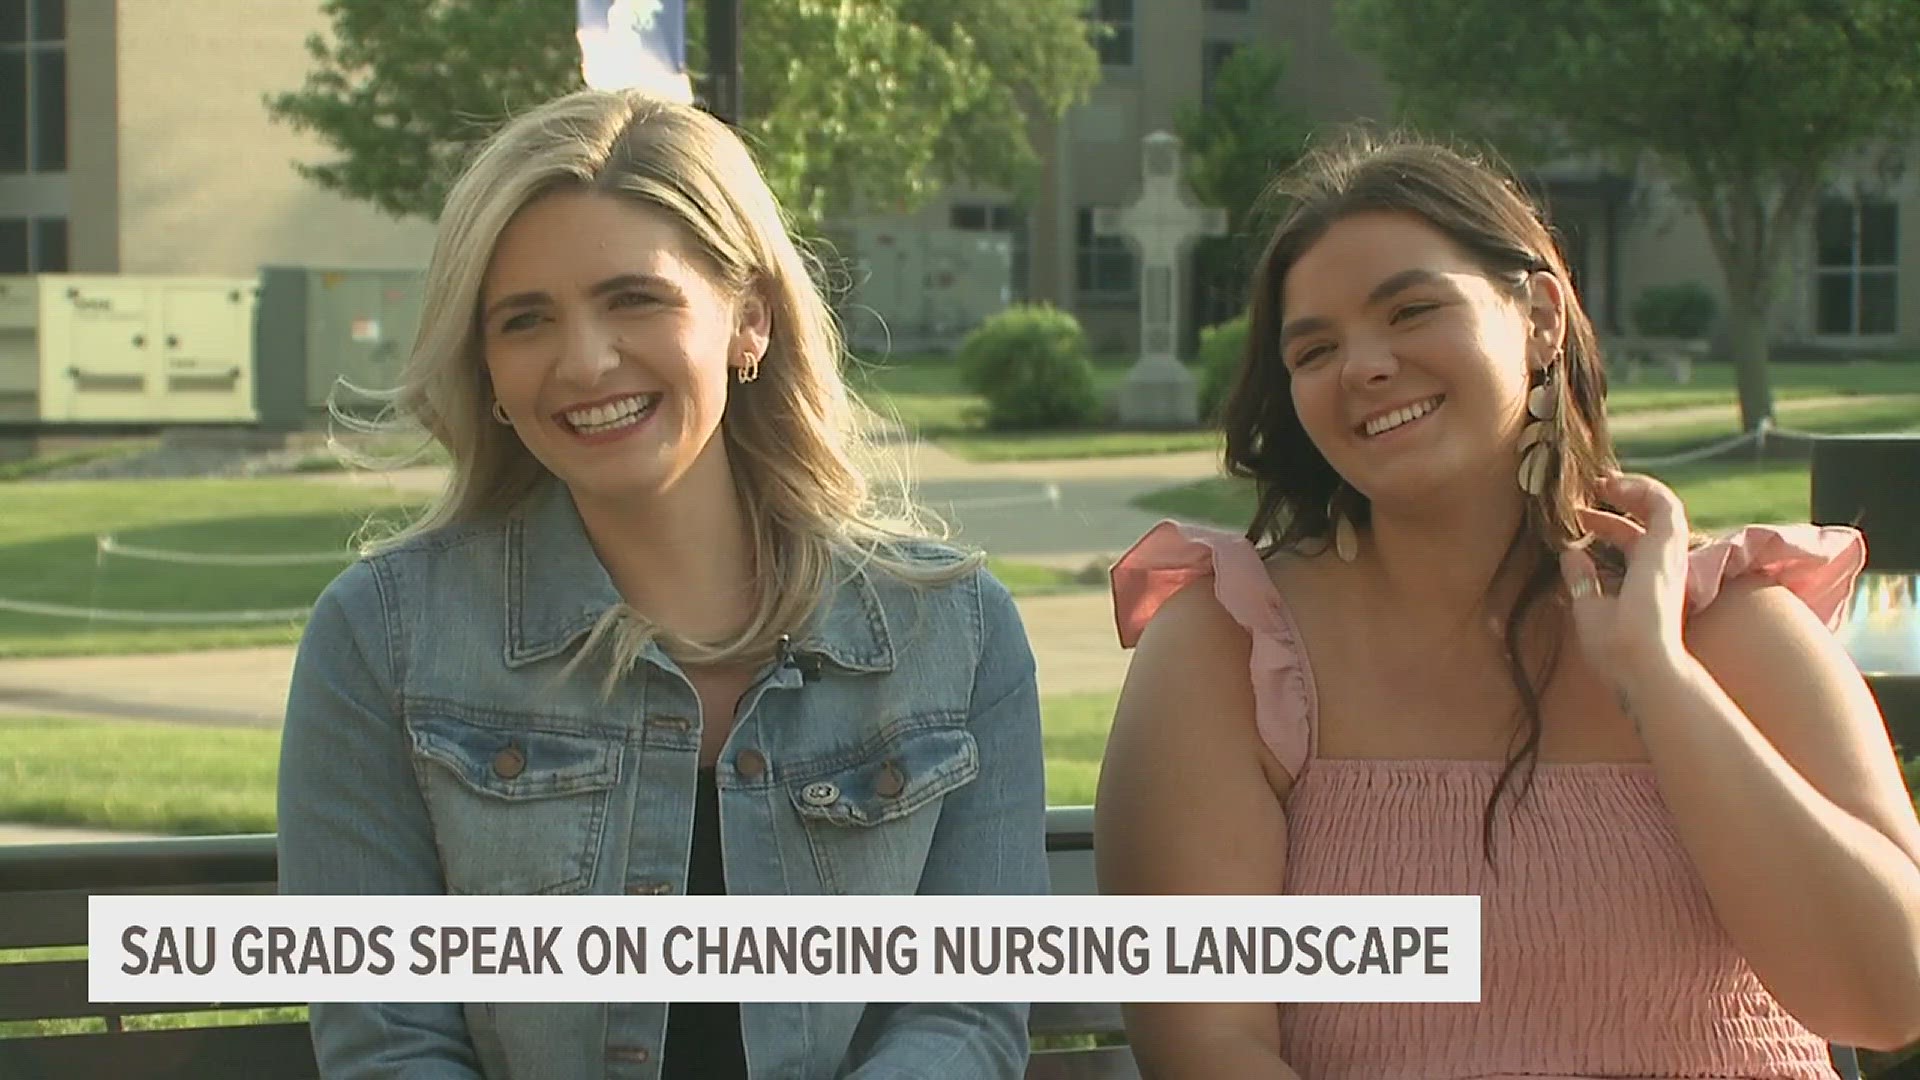 St. Ambrose Univ. alum Hannah Hosty '15 and Mackenzie Zions '23 share how the nursing industry has changed in the 8 years each graduated from the nursing program.